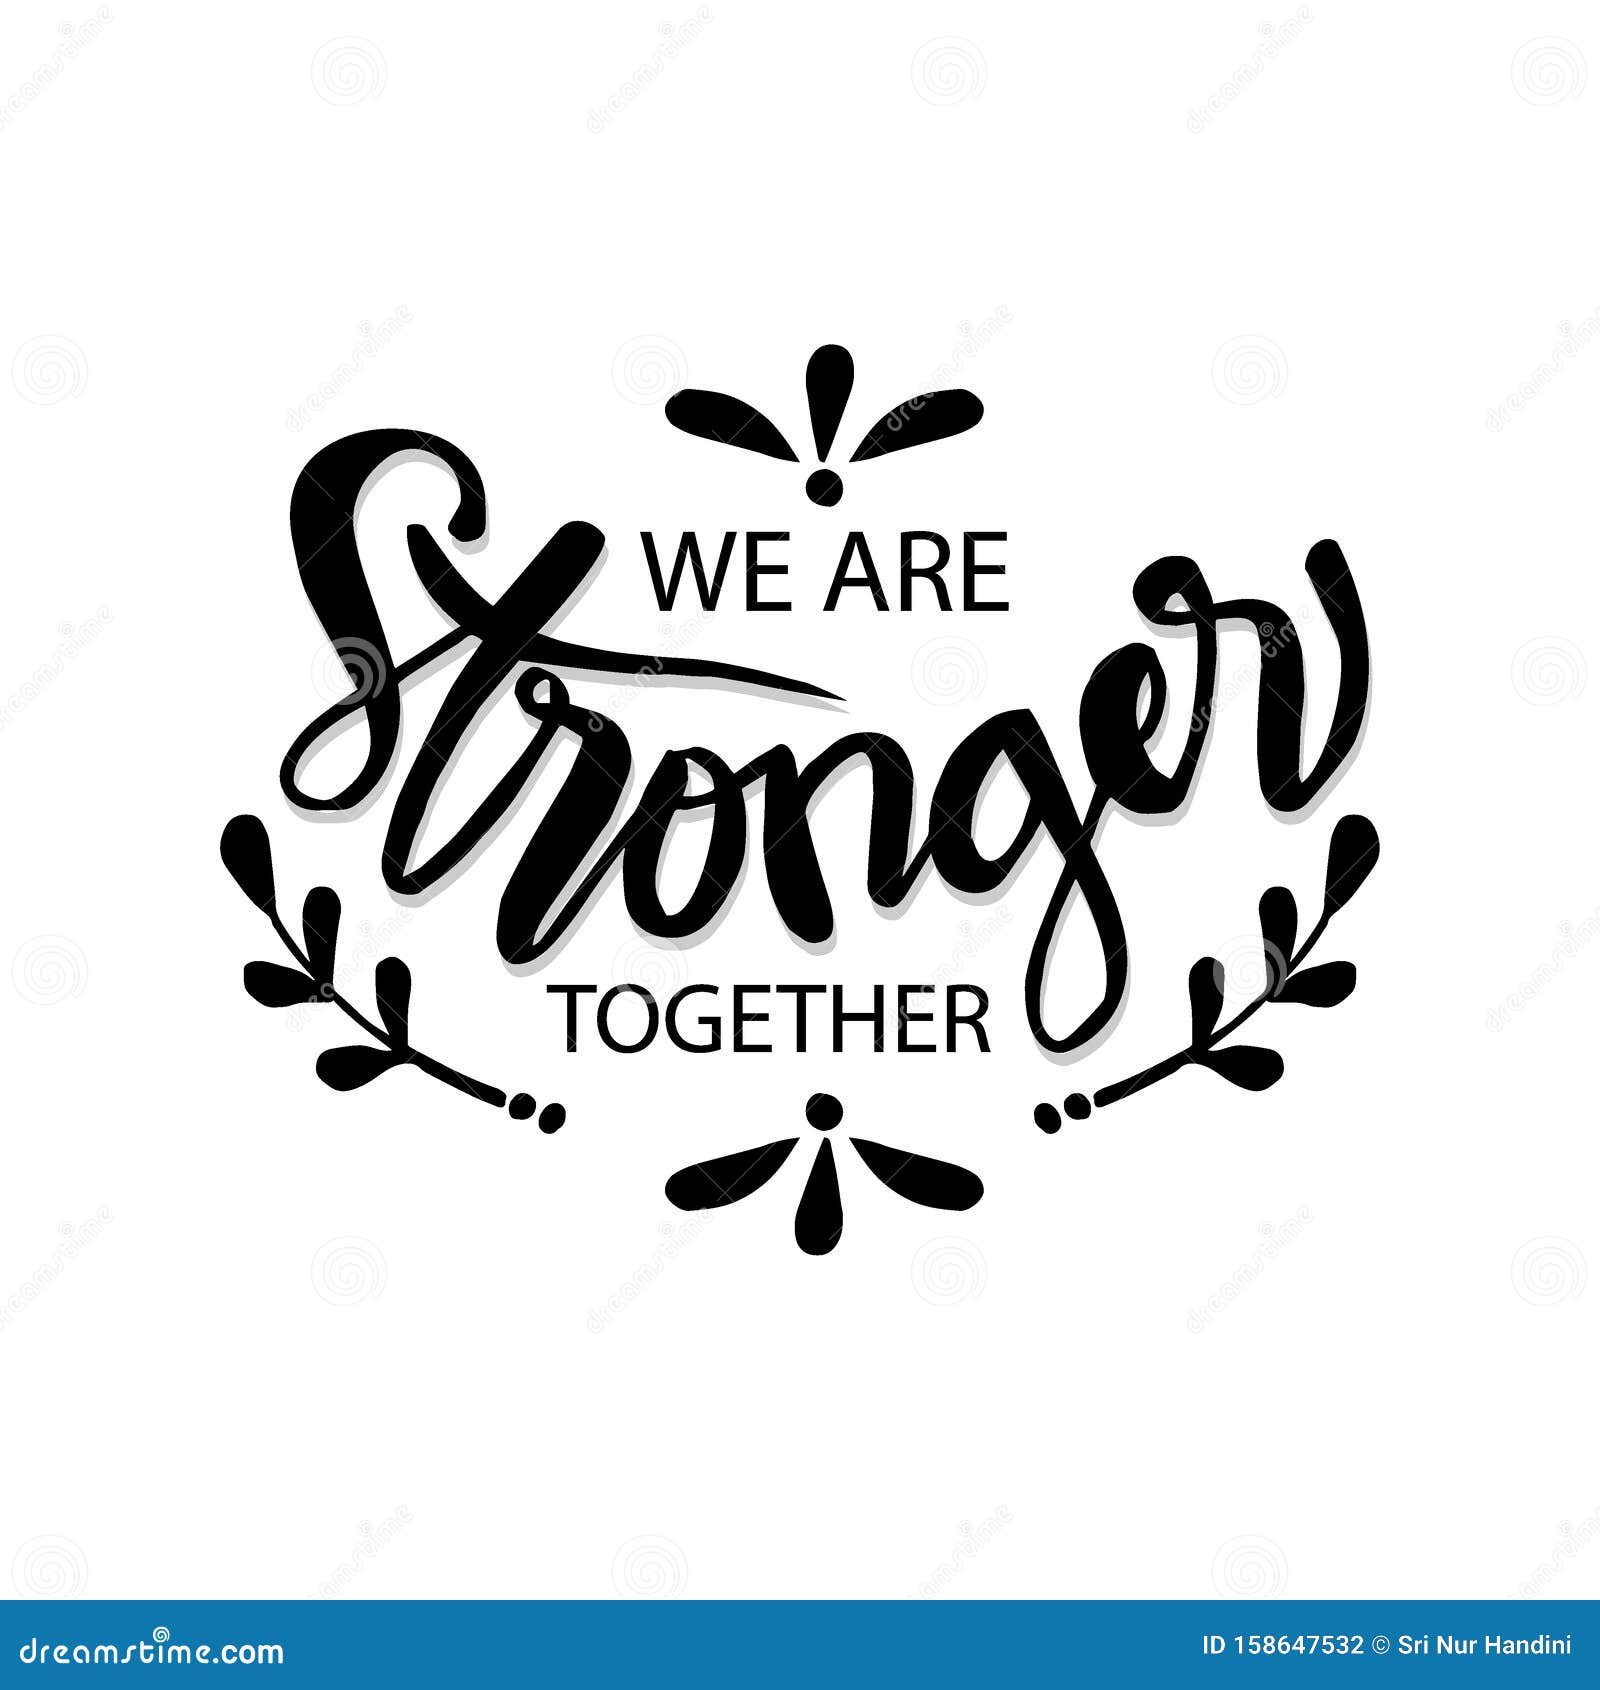 Stronger Together Lifting The Words Royalty Free Stock Image